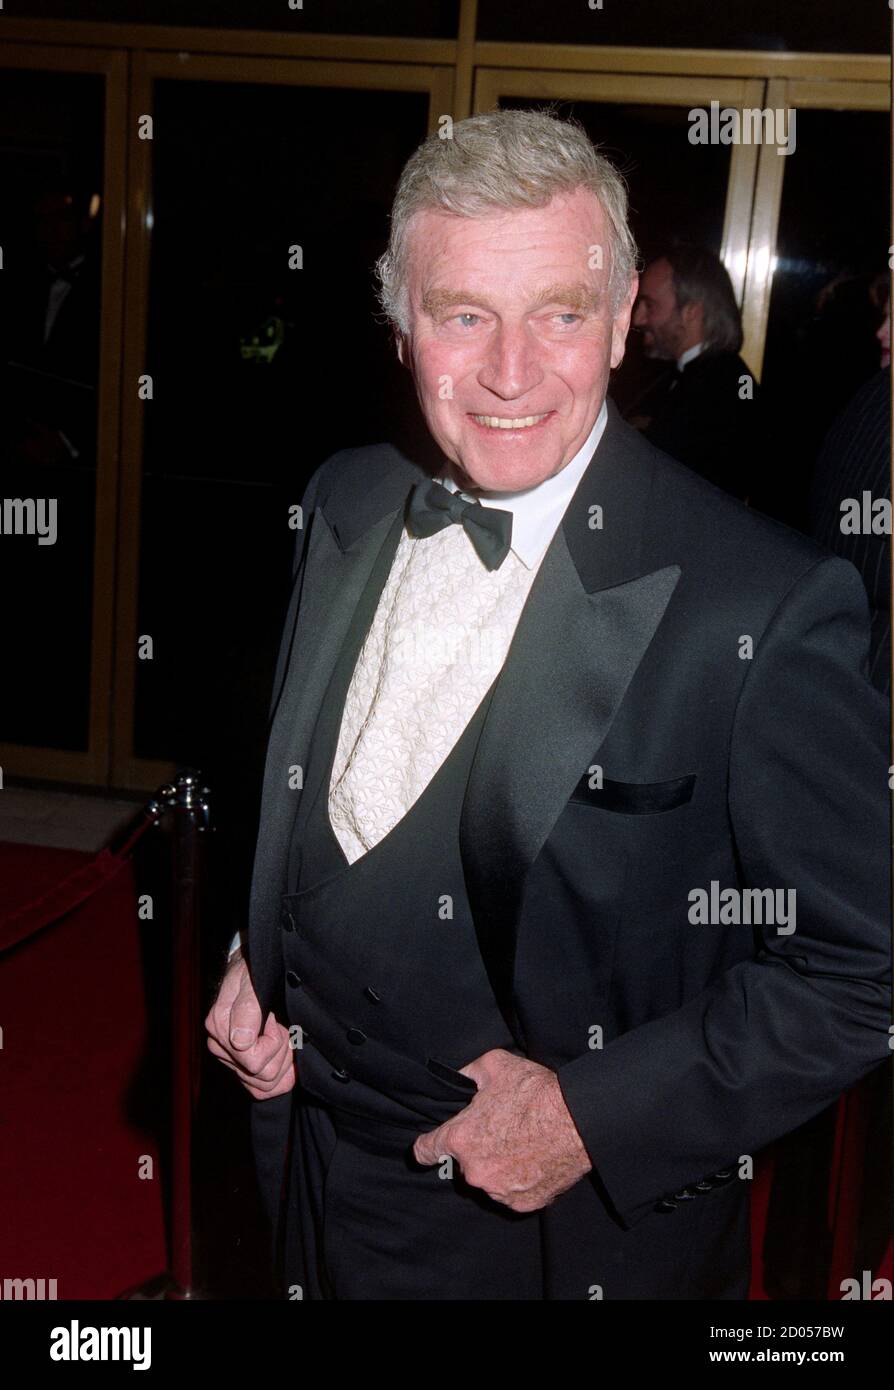 ARCHIVE: LOS ANGELES, CA. April 28, 1994: Actor Charlton Heston at the premiere of 'That's Entertainment! III' in Los Angeles. File photo © Paul Smith/Featureflash Stock Photo